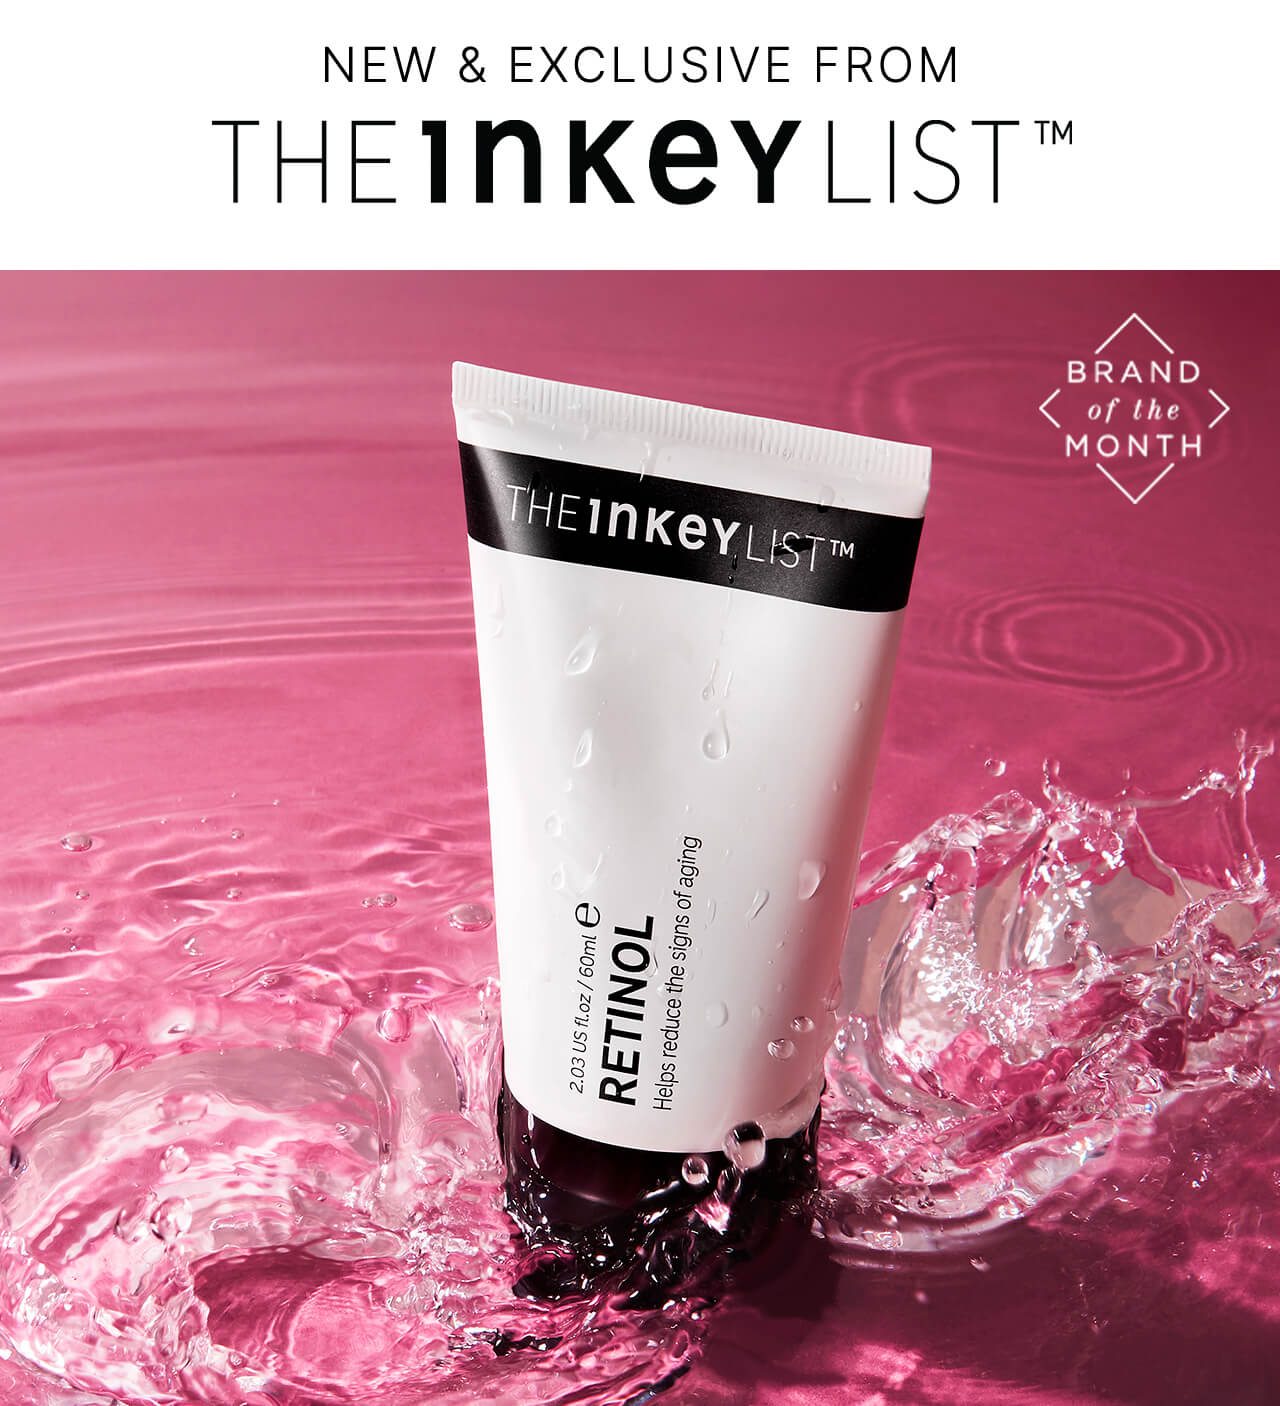 NEW & EXCLUSIVE FROM THE INKEY LIST